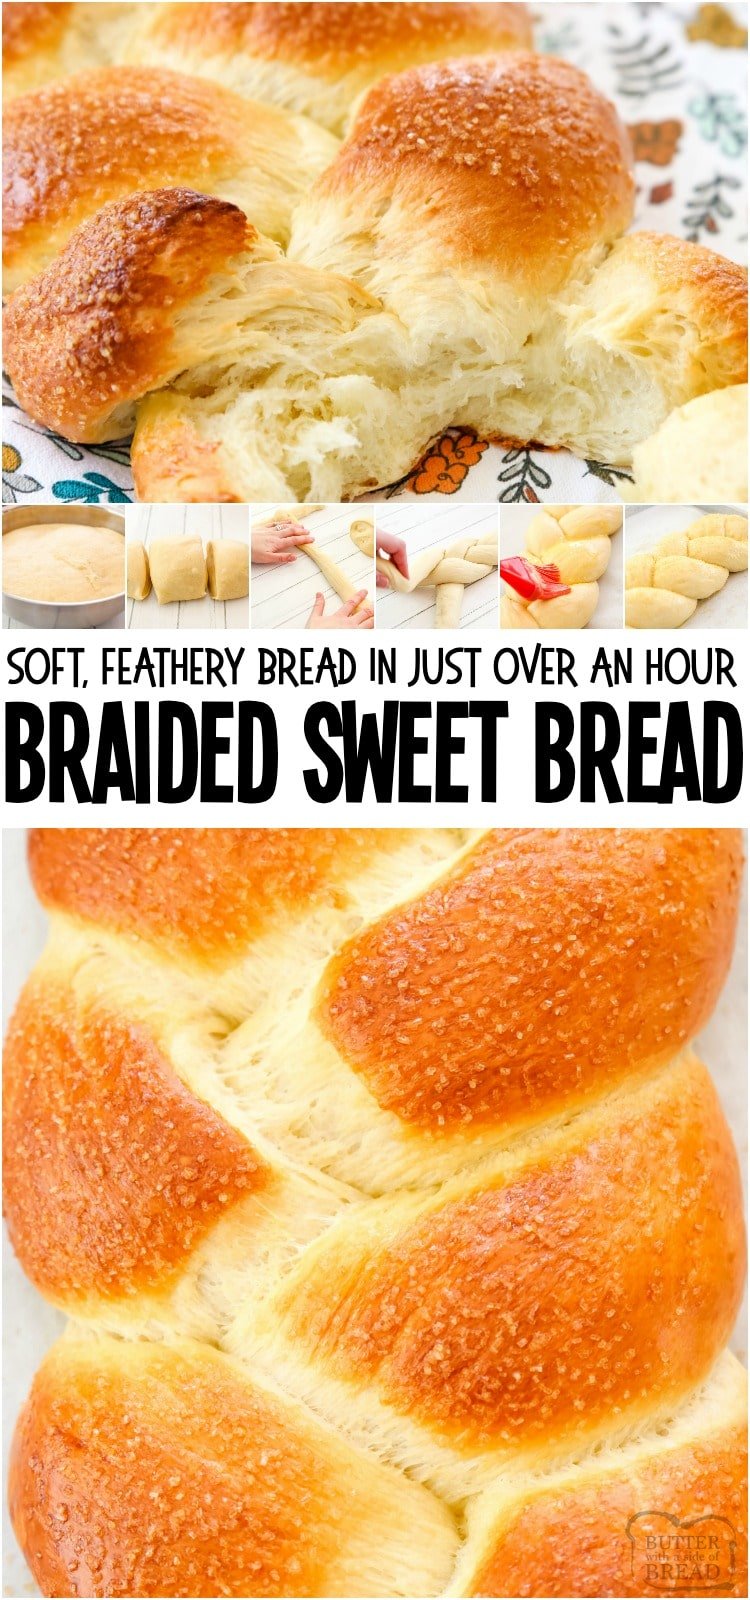 Braided sweet bread is a delicious and gorgeous homemade bread that looks as good as it tastes. With a sweetened golden top crust and fluffy bread inside, you’re going to love this sweet bread recipe. #bread #homemade #sweetbread #braided #recipe #baking from BUTTER WITH A SIDE OF BREAD